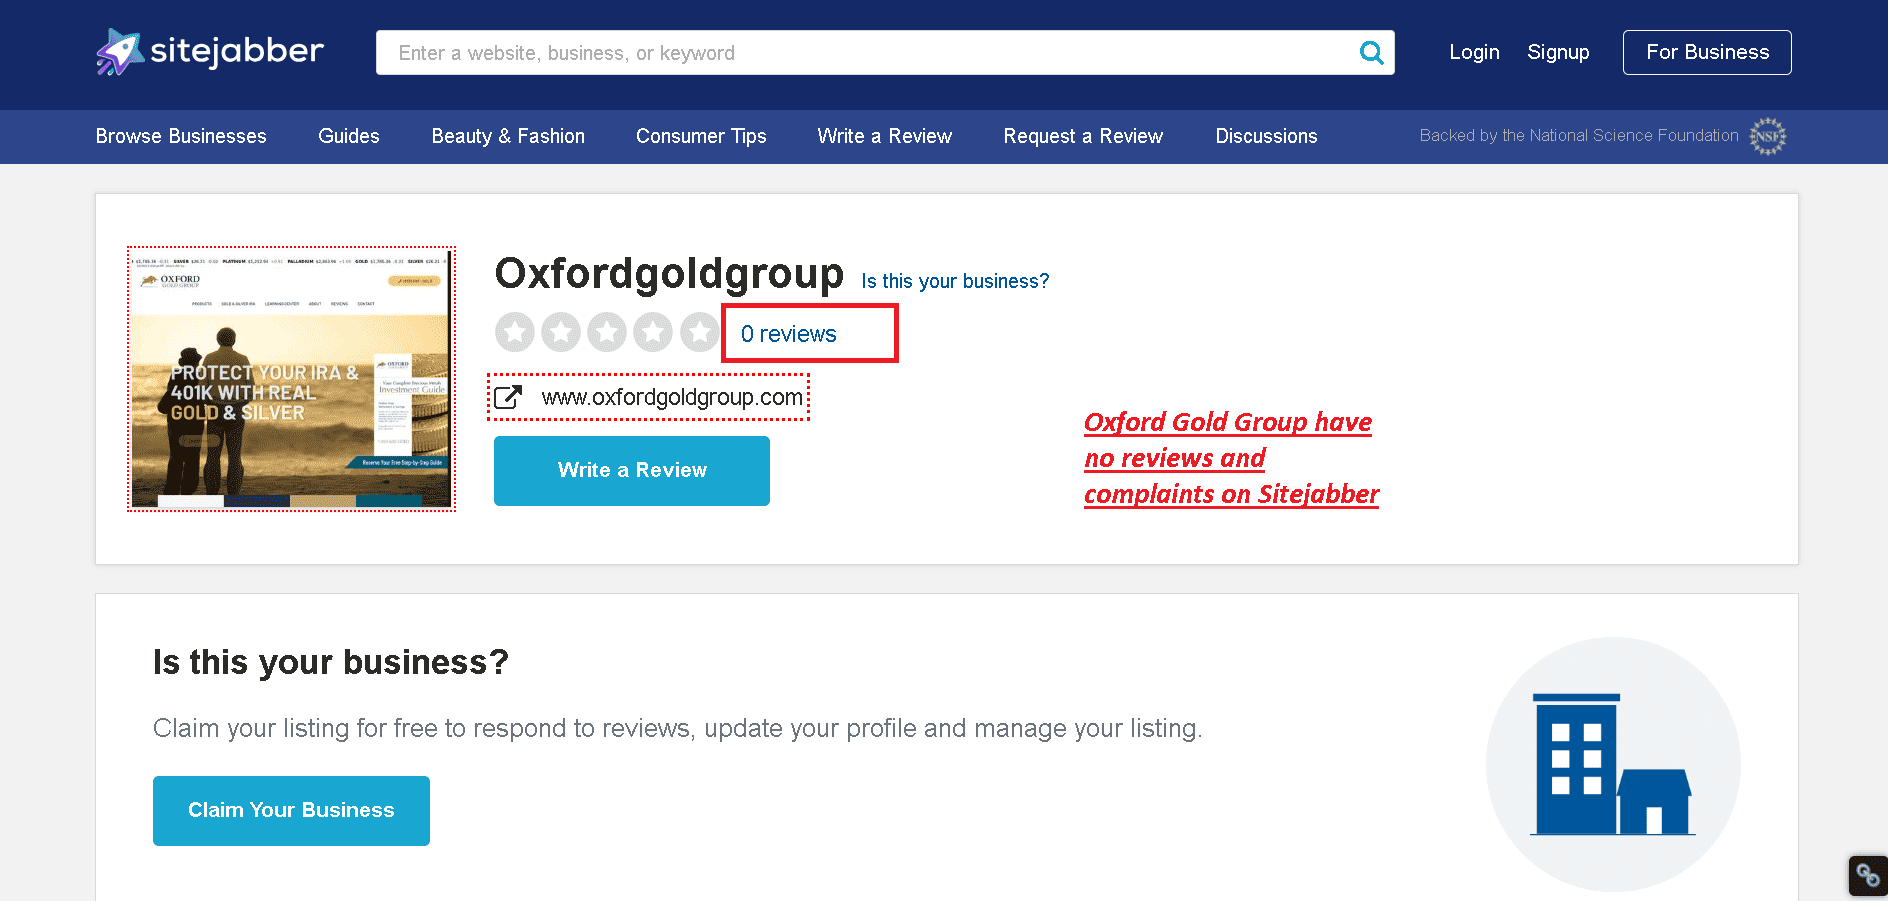 Oxford Gold Group have no customer reviews and complaints on Sitejabber